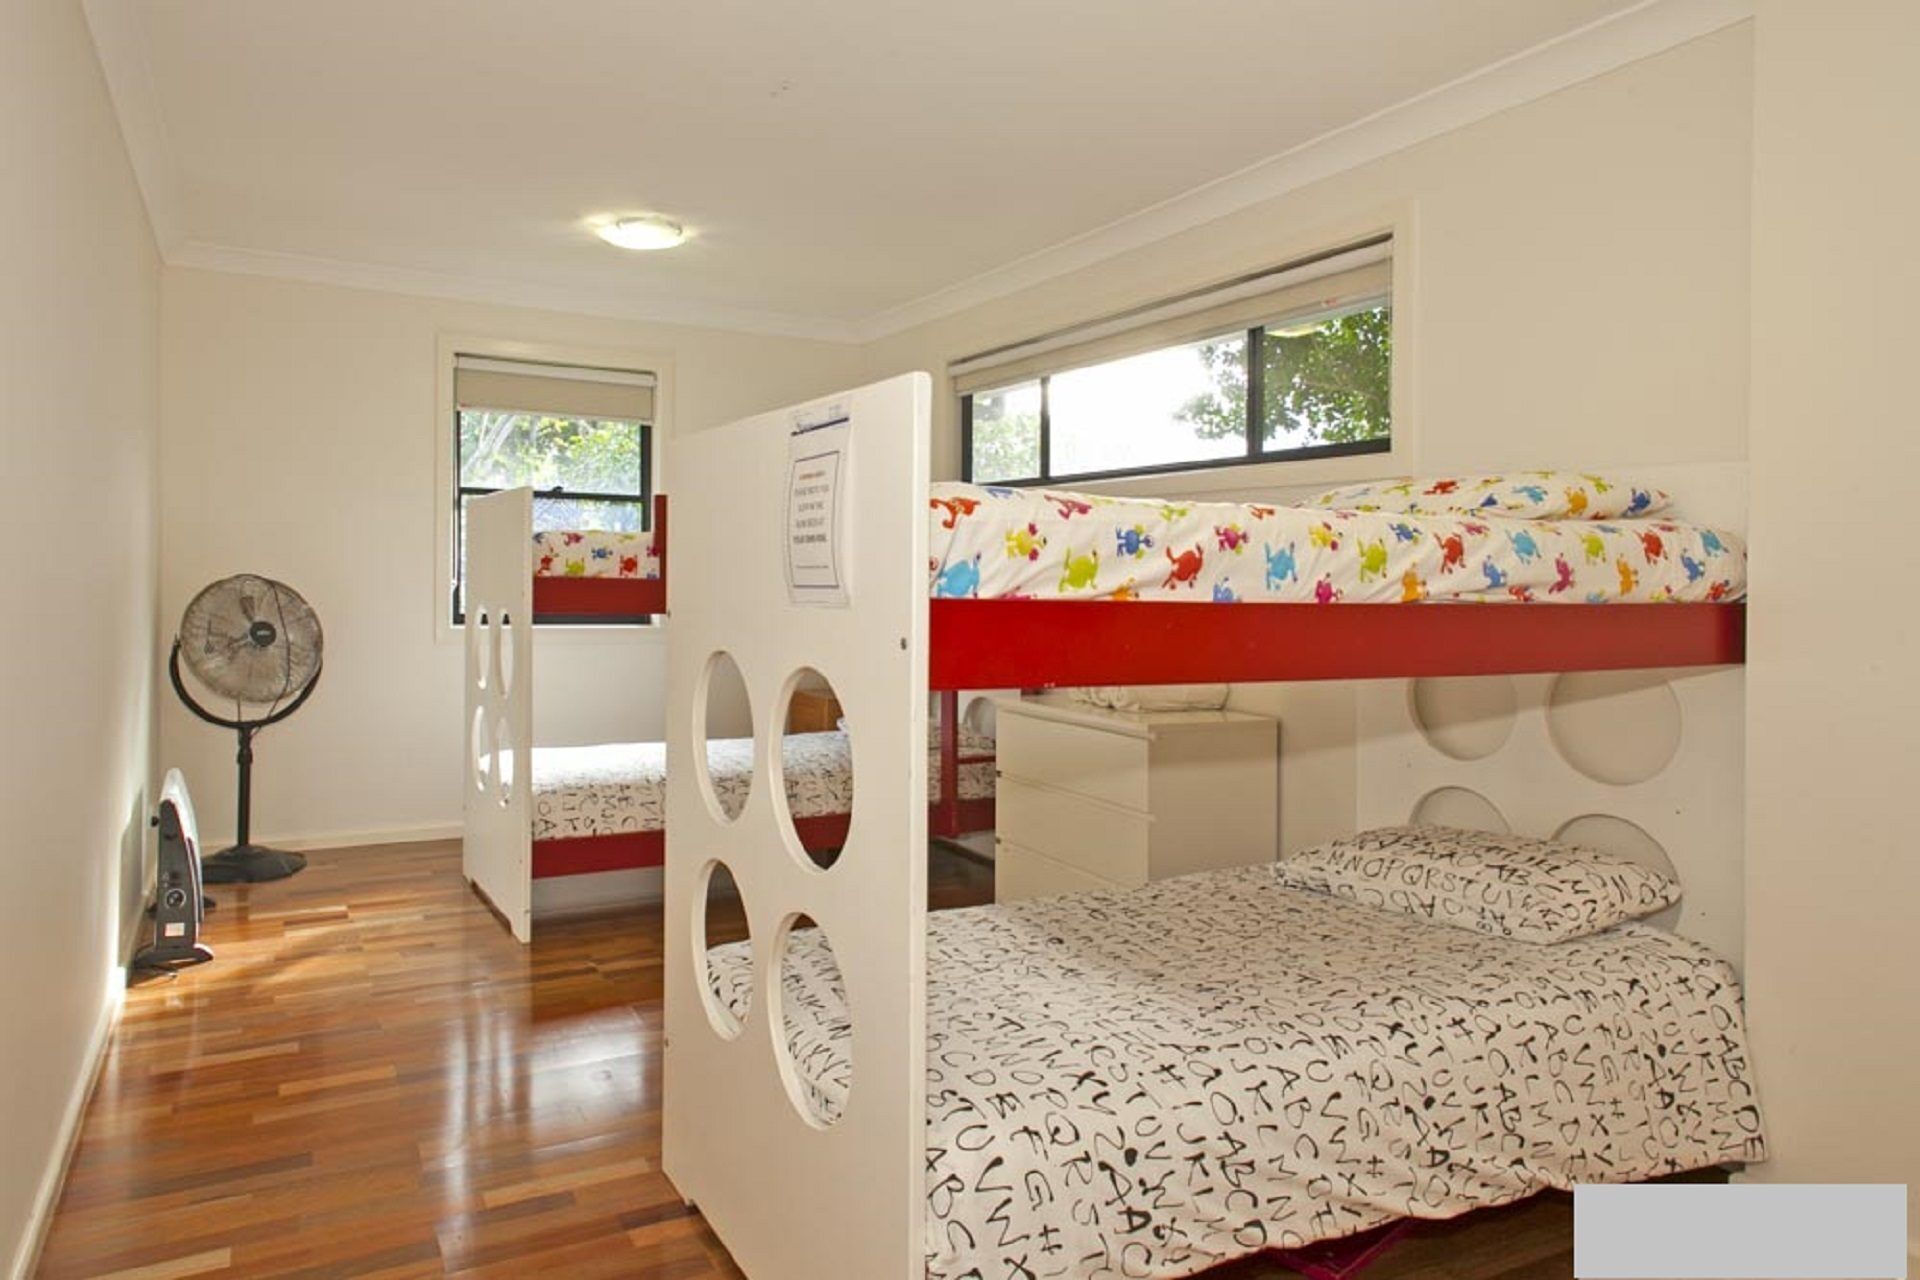 Hibiscus House in Sunny Sawtell